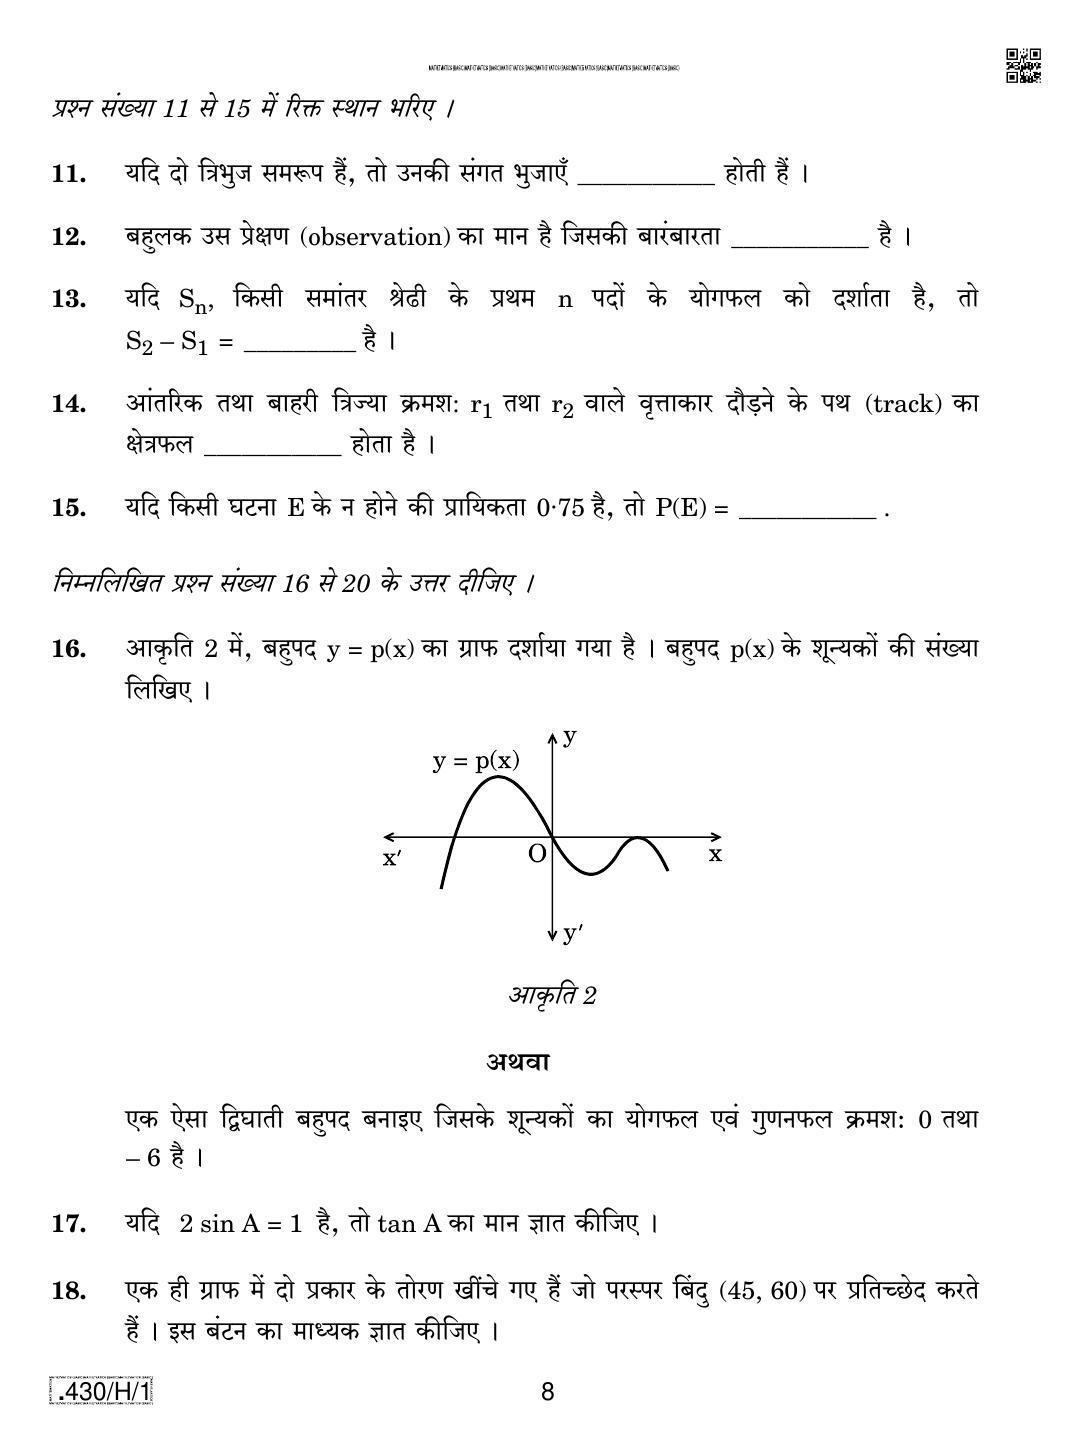 CBSE Class 10 430-C-1 - Maths (Basic) 2020 Compartment Question Paper - Page 8